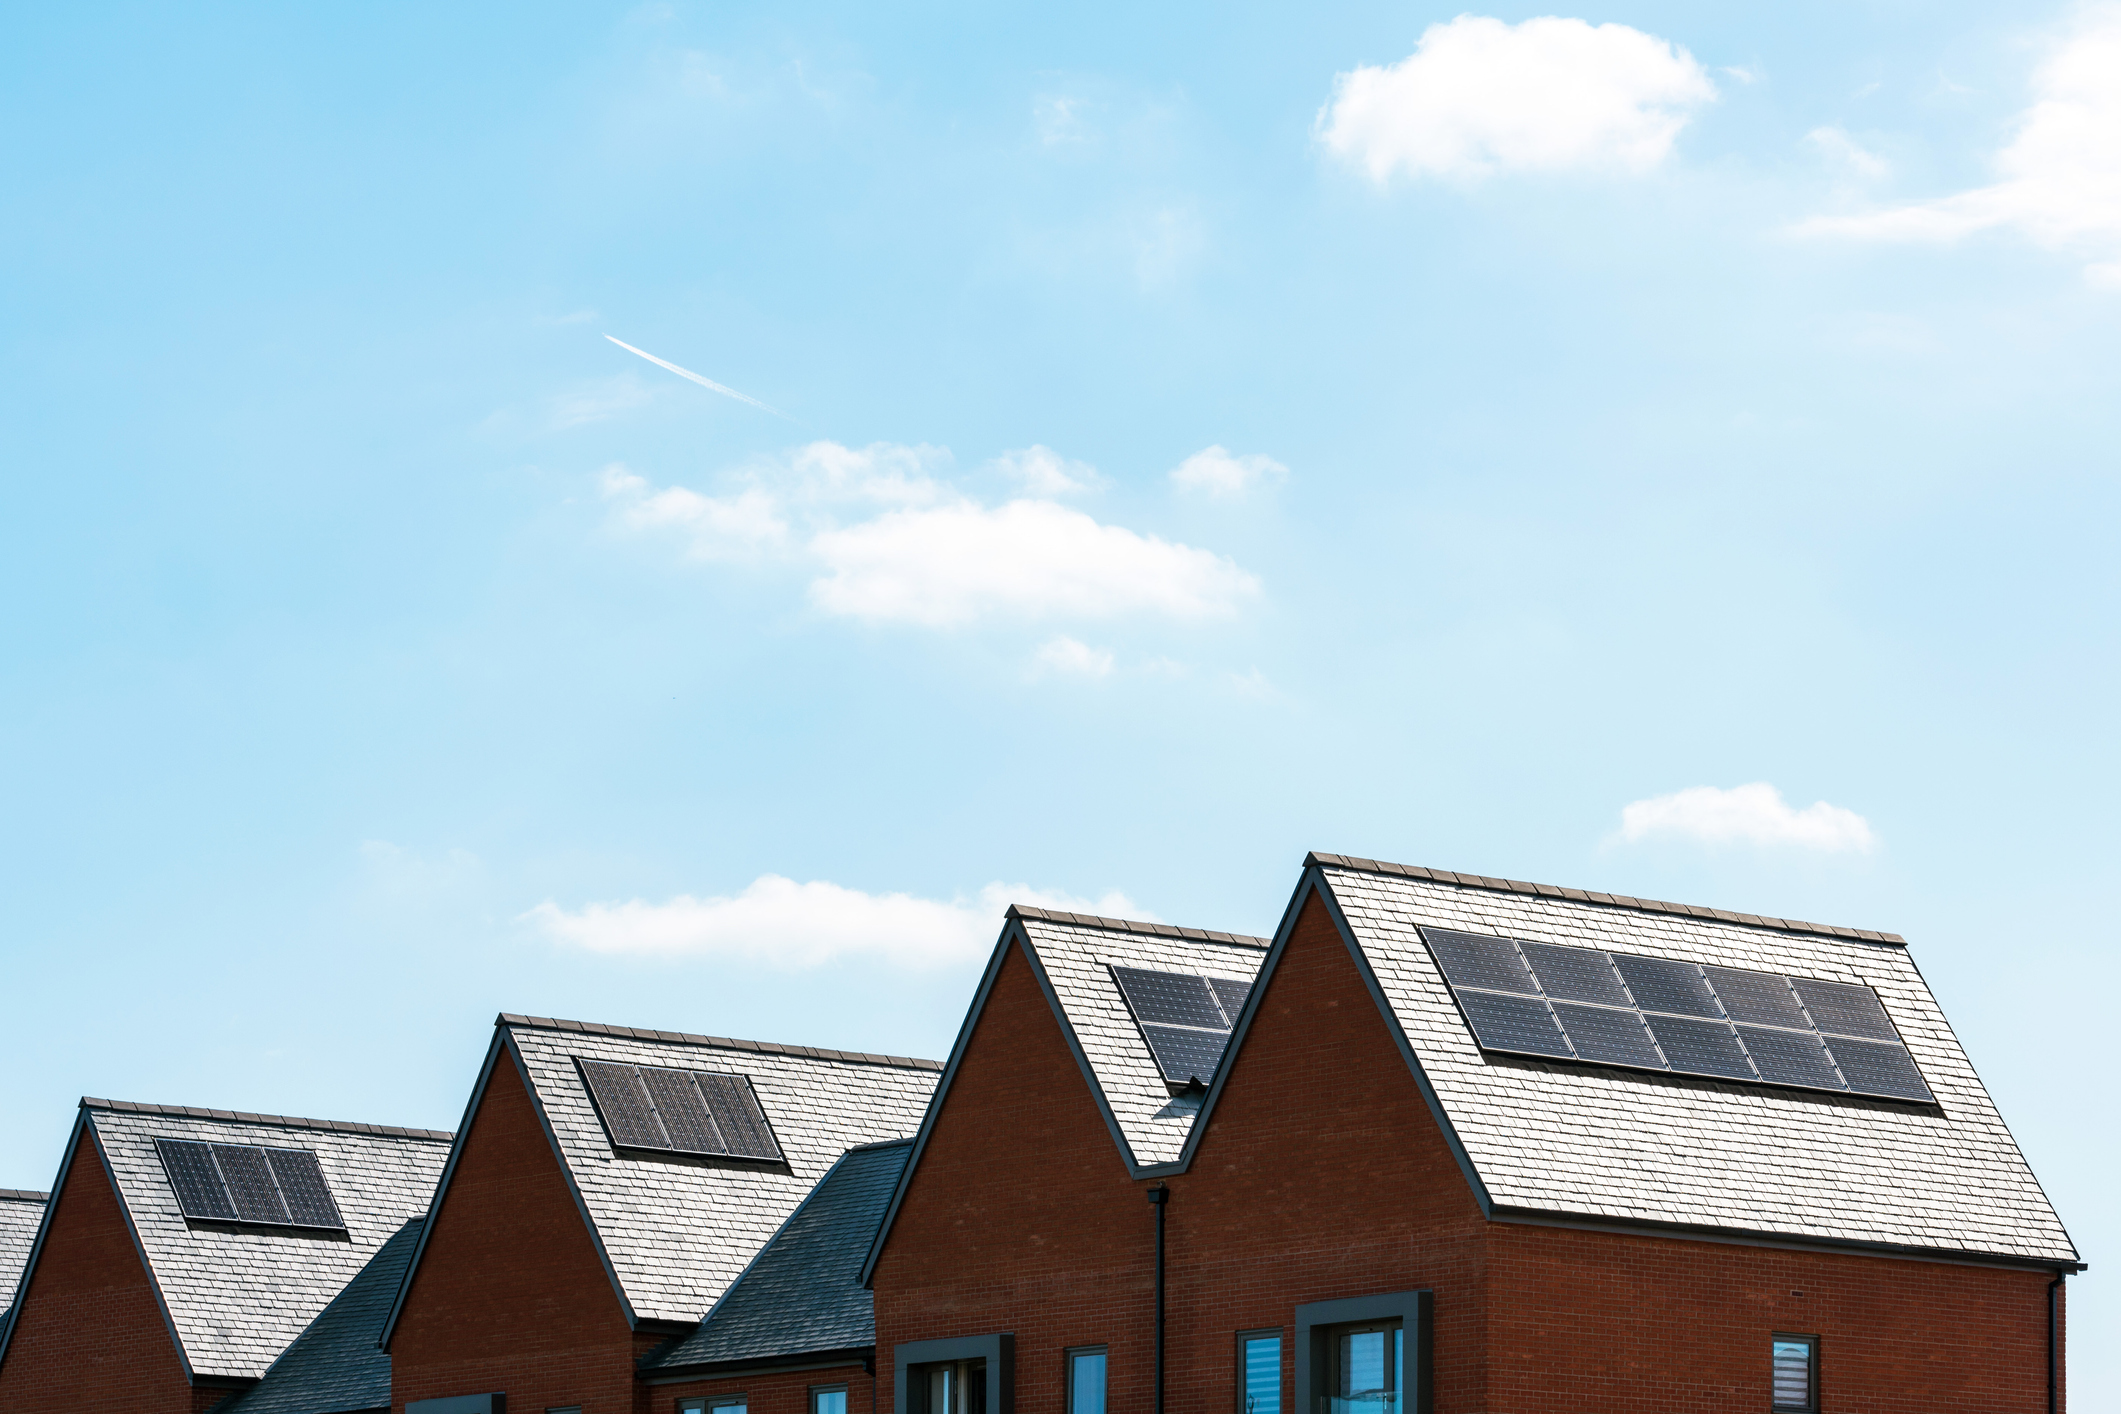 solar panels on roof of new houses in England uk on bright sunny day.